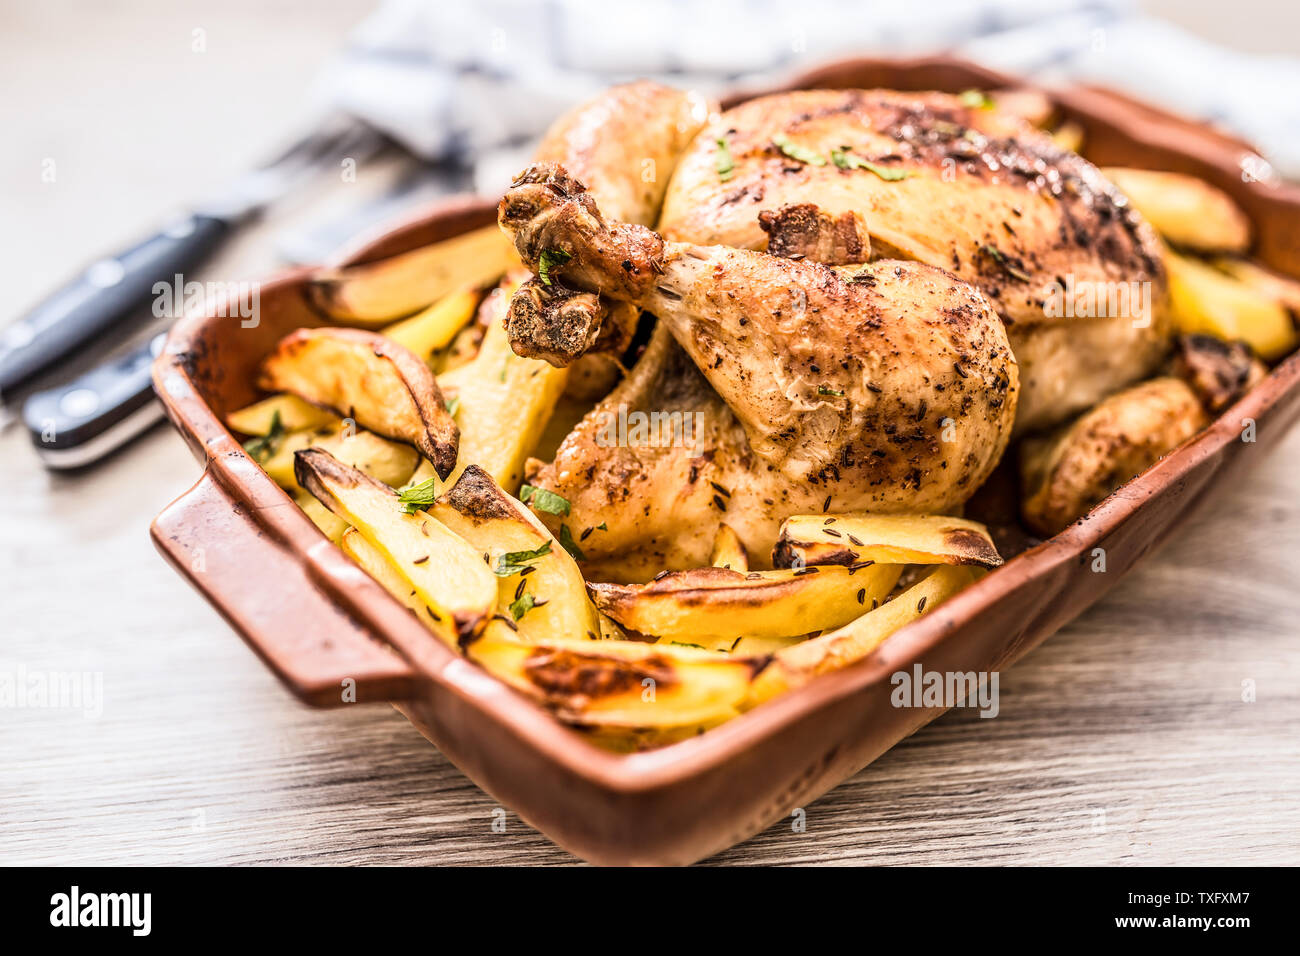 Roasted whole chicken with potatoes in baking dish. Tasty food at home on the kitchen counter Stock Photo